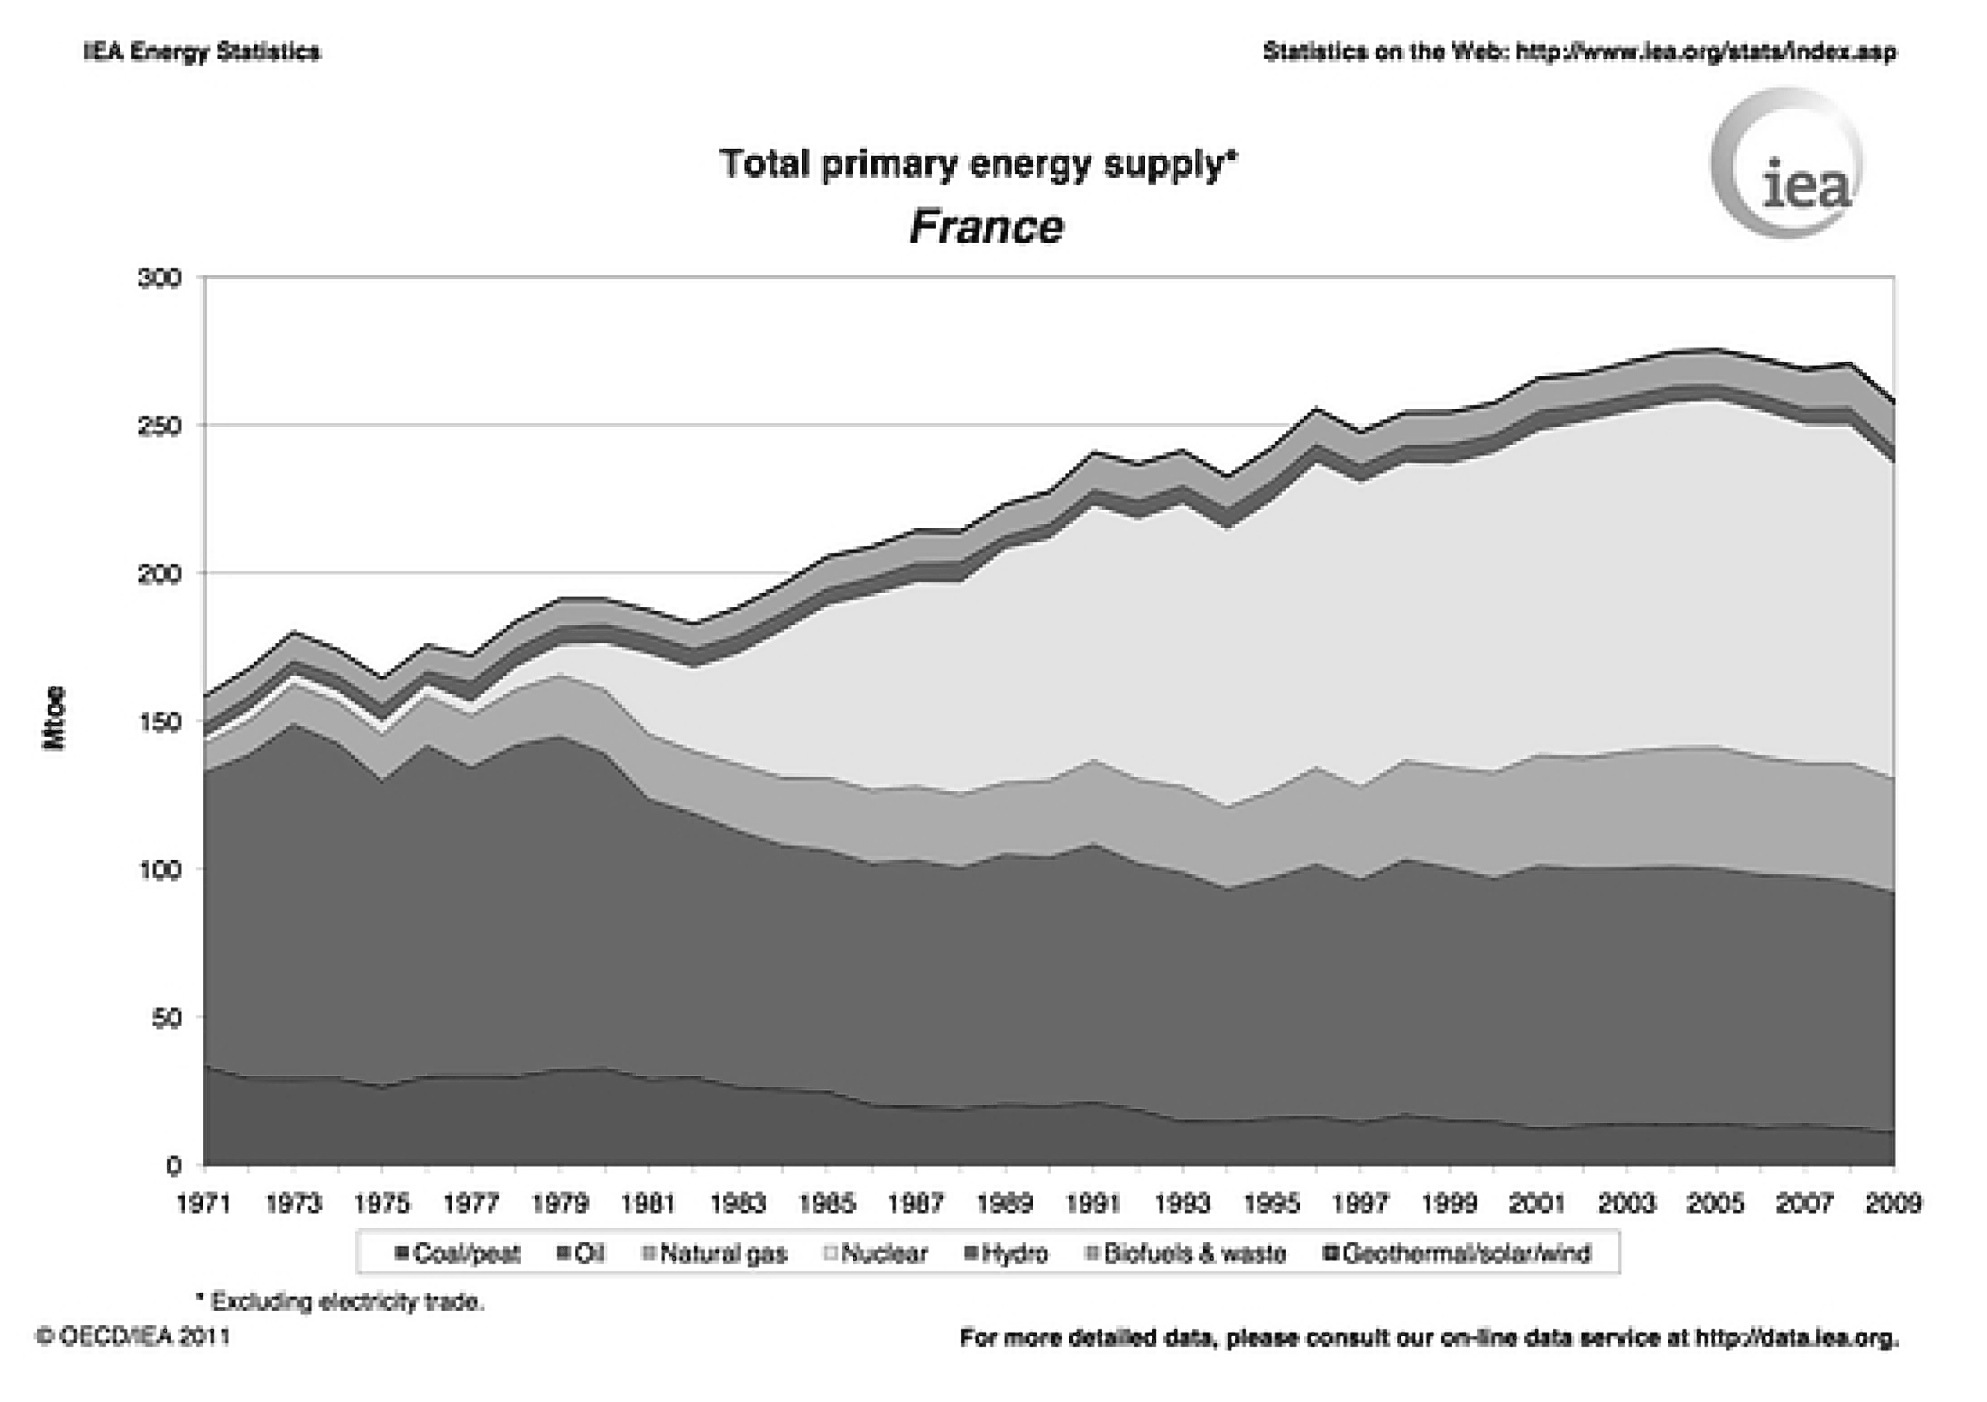 France nuclear shift in 1980's in numbers